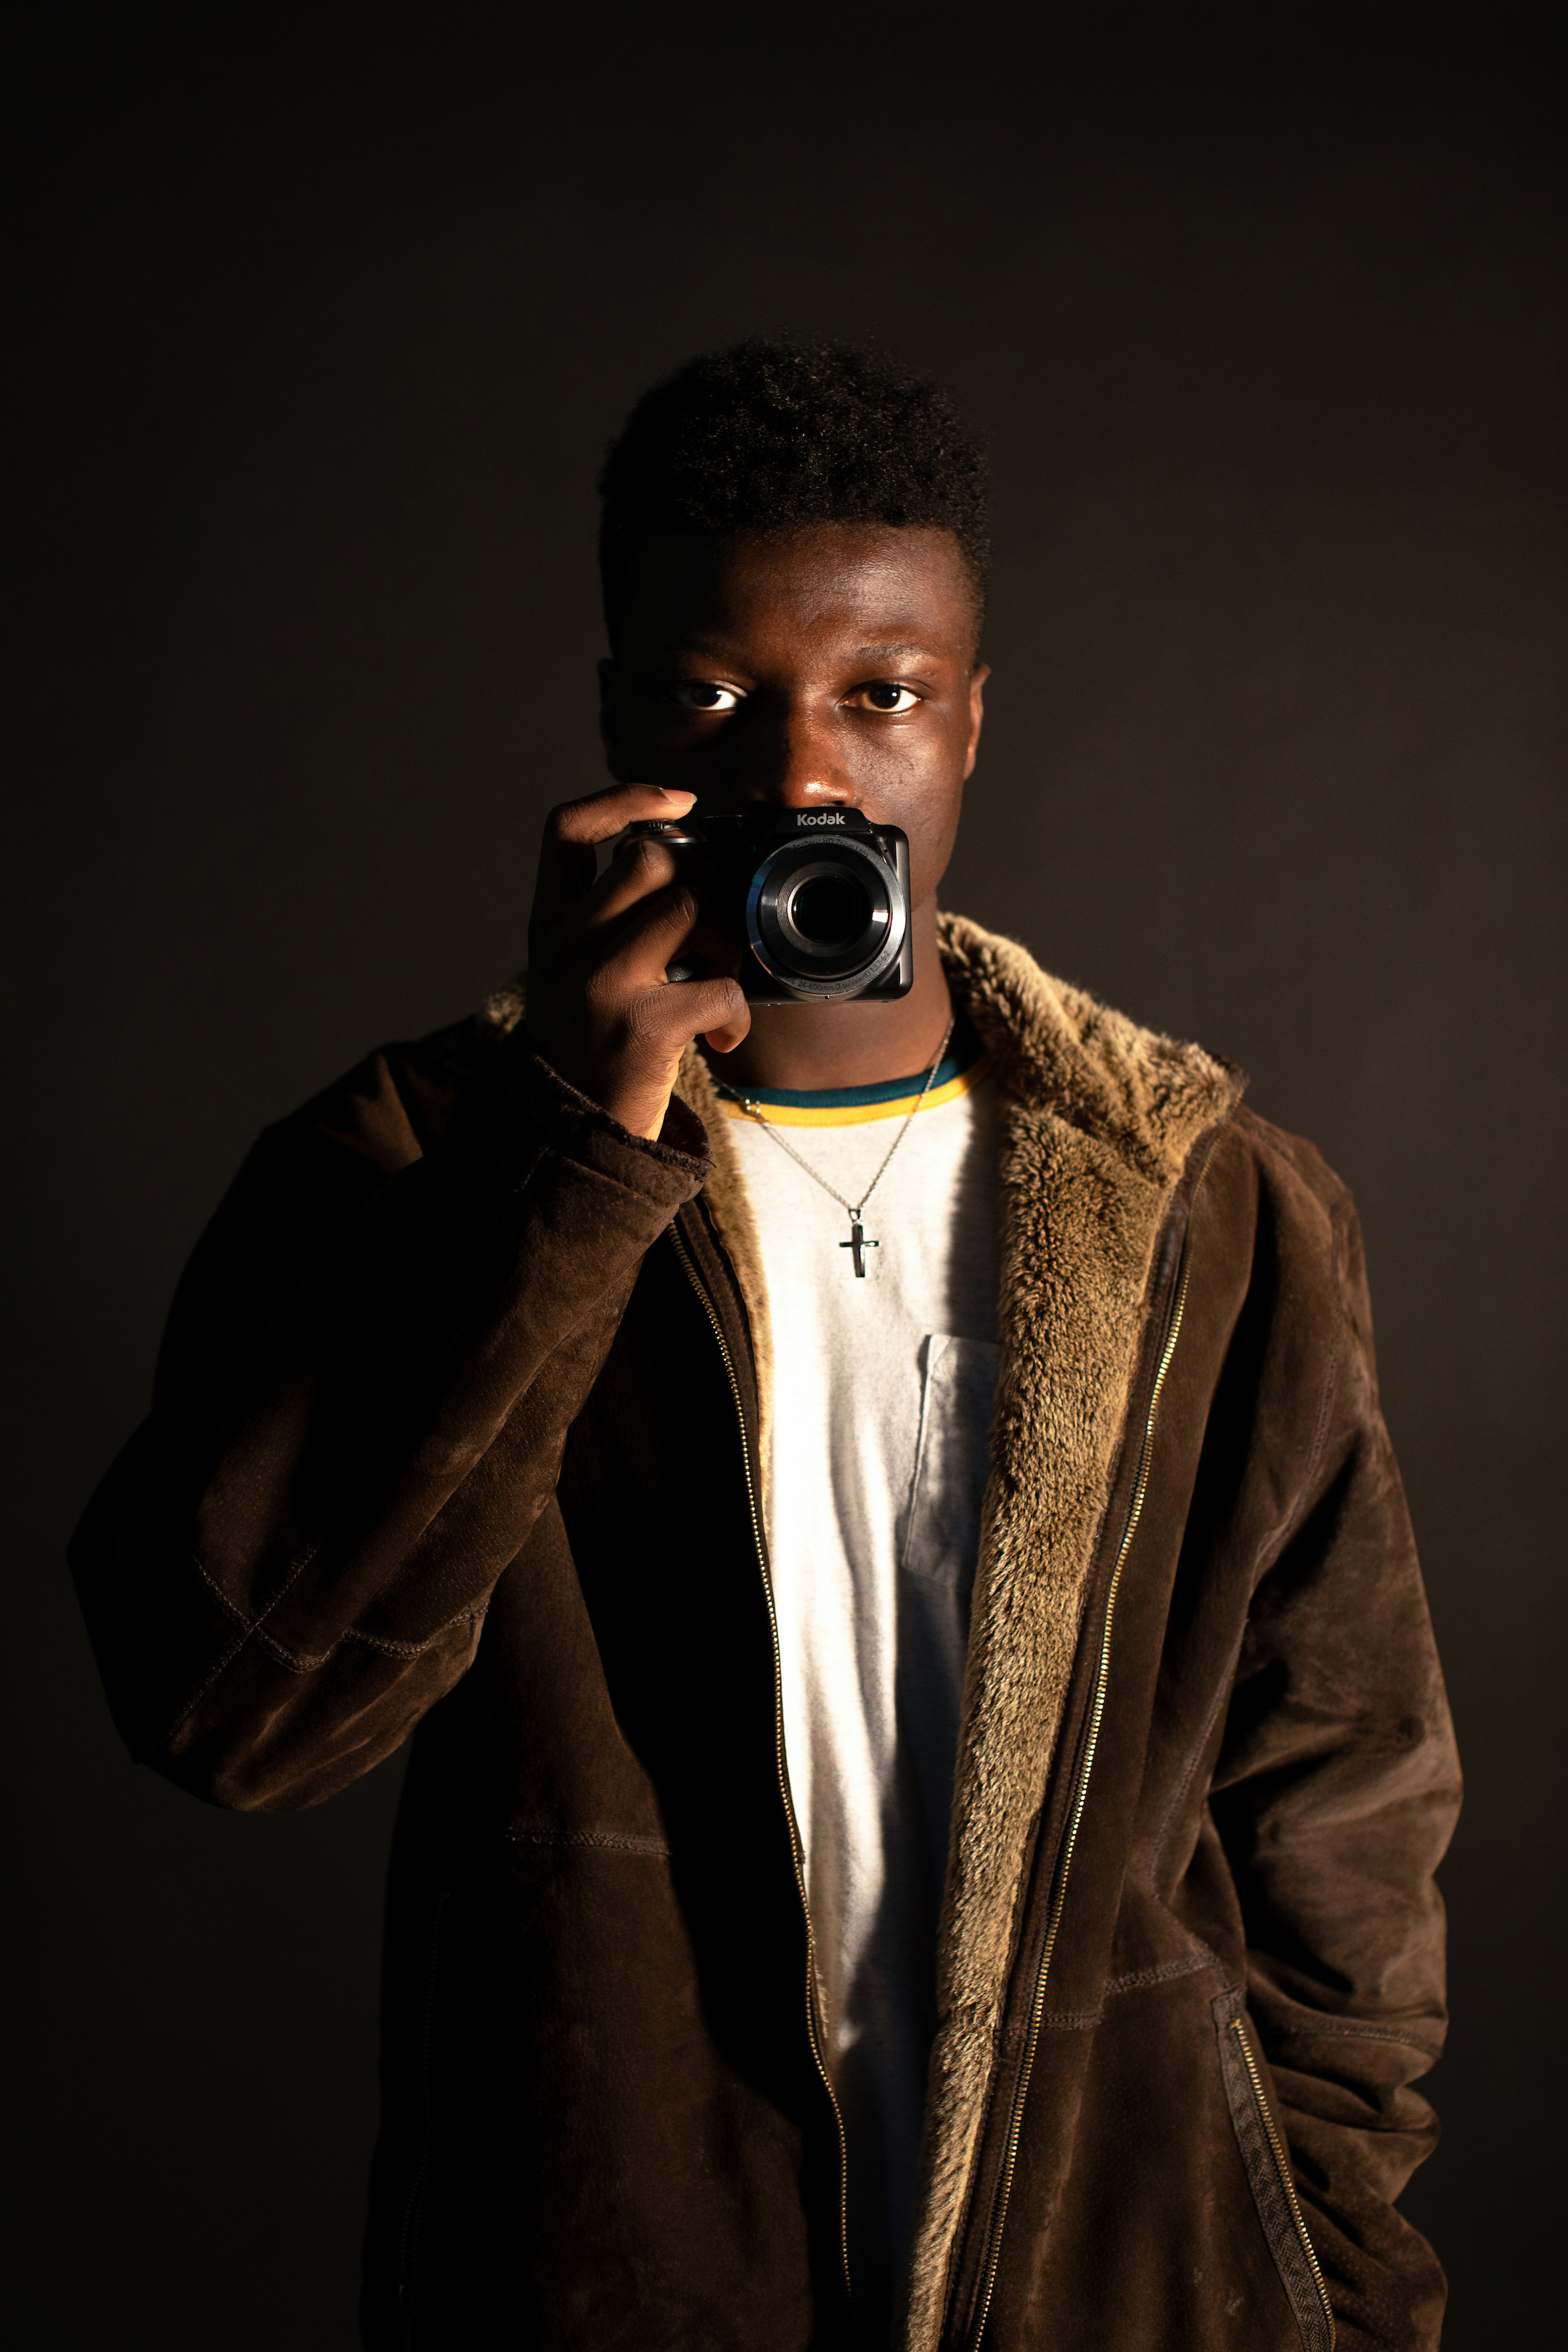 Full body Self-portrait photograph of a young black man in a coat against a black background